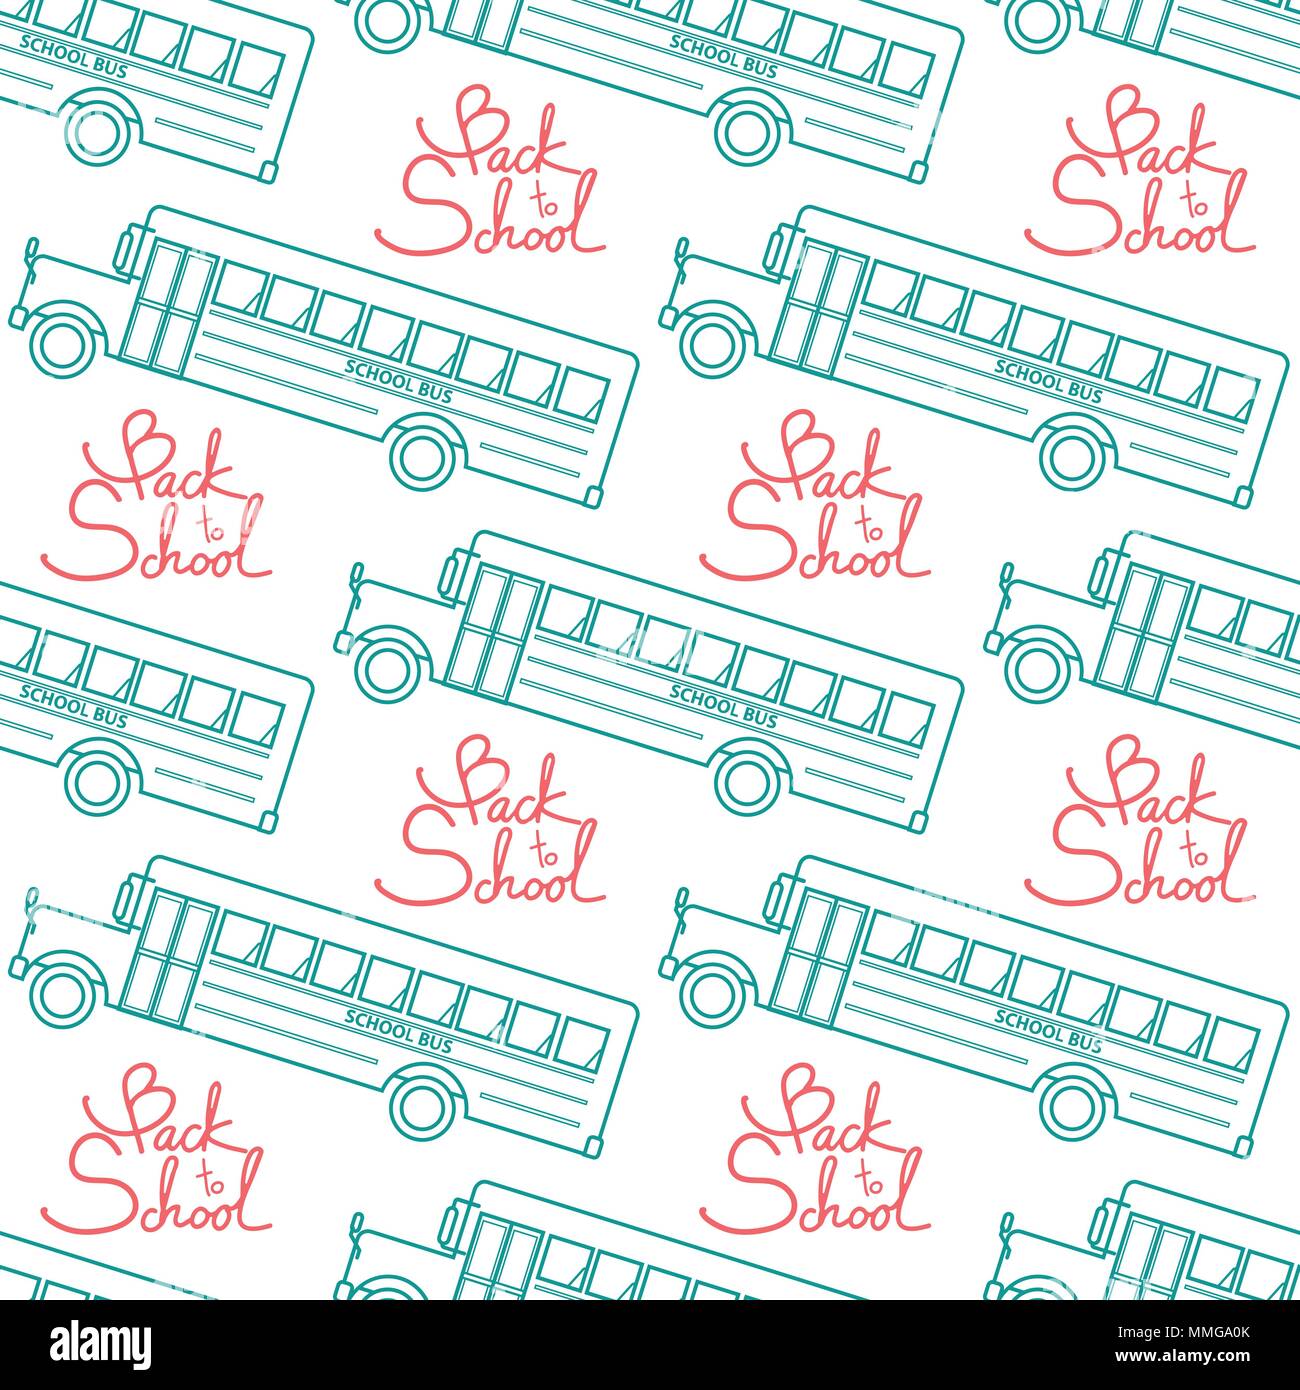 School bus in green outline with red calligraphy, Back to school random on white background. Seamless pattern background design for school and educati Stock Vector